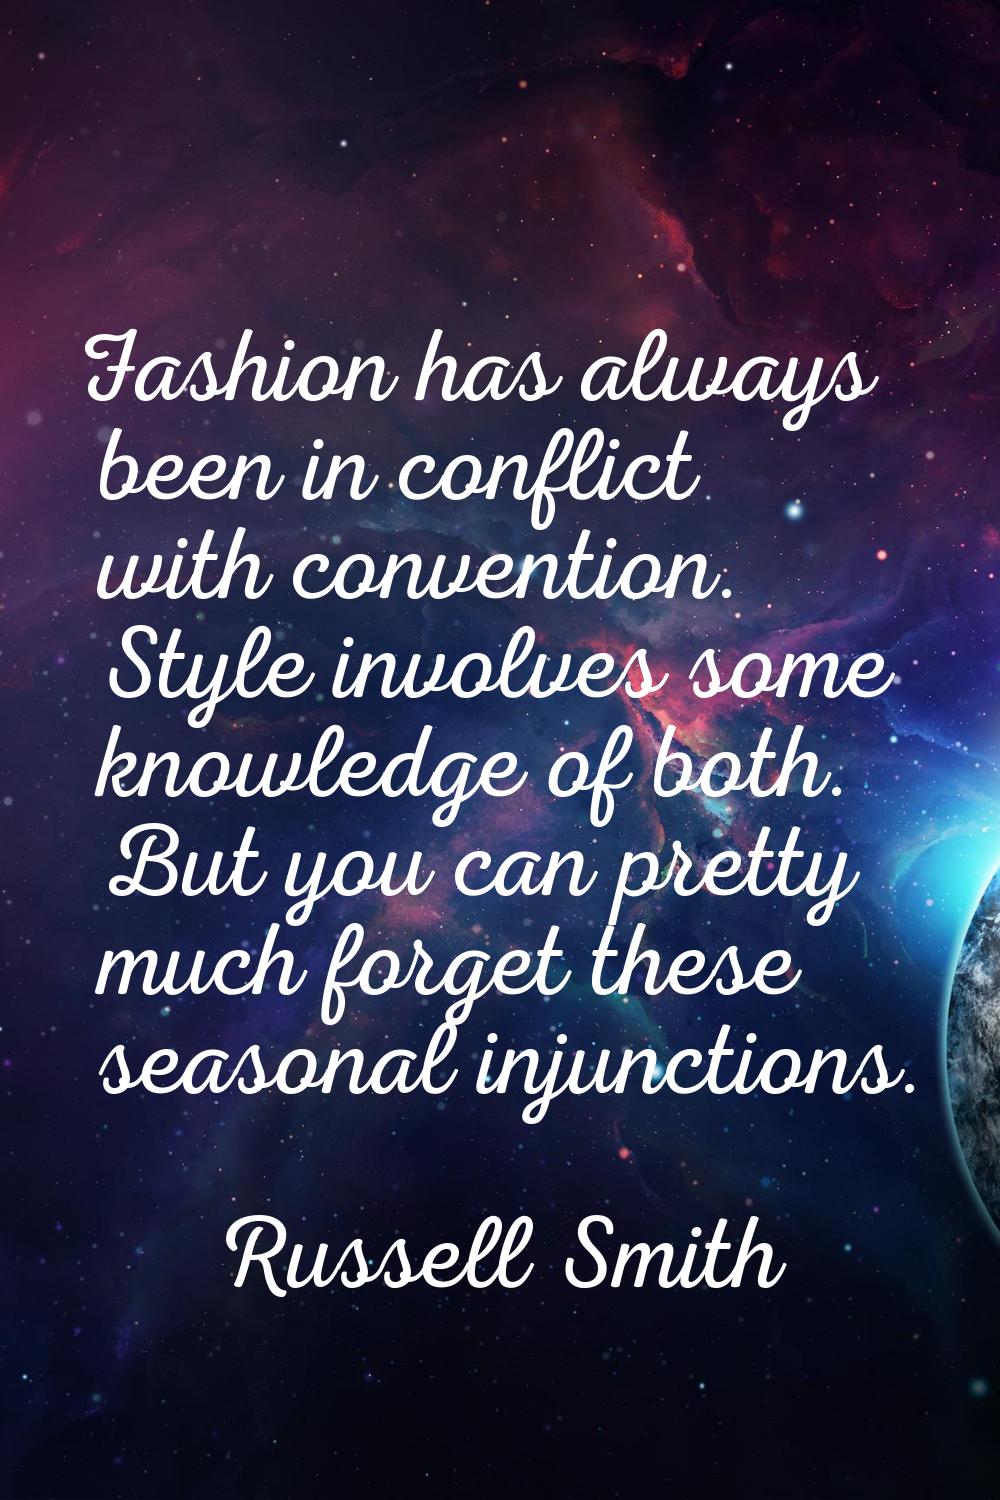 Fashion has always been in conflict with convention. Style involves some knowledge of both. But you